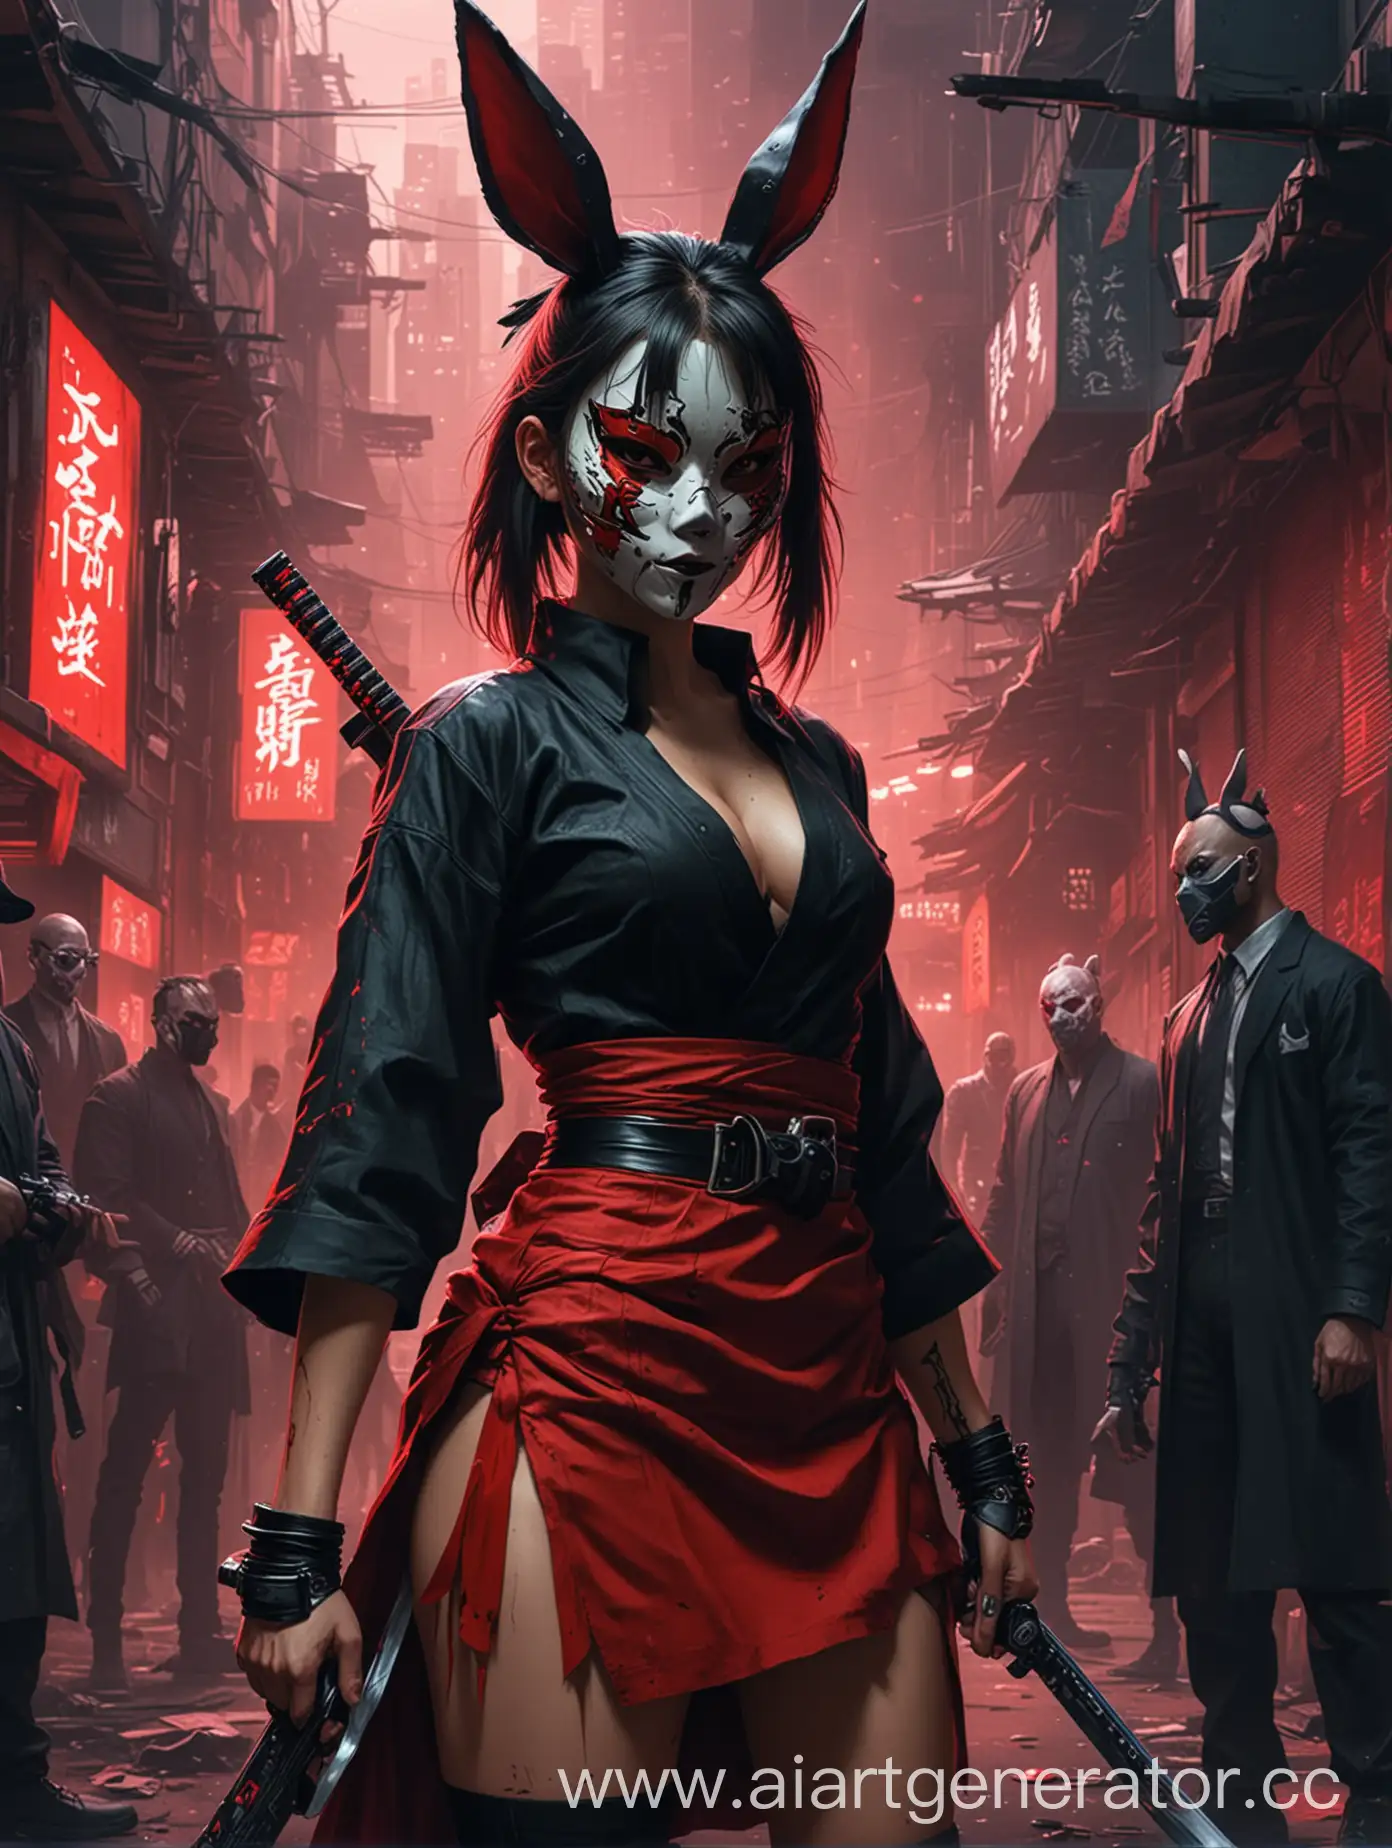 Cyberpunk-Samurai-in-Black-Shirt-and-Rabbit-Mask-Defeats-Mobsters-and-RedDressed-Girl